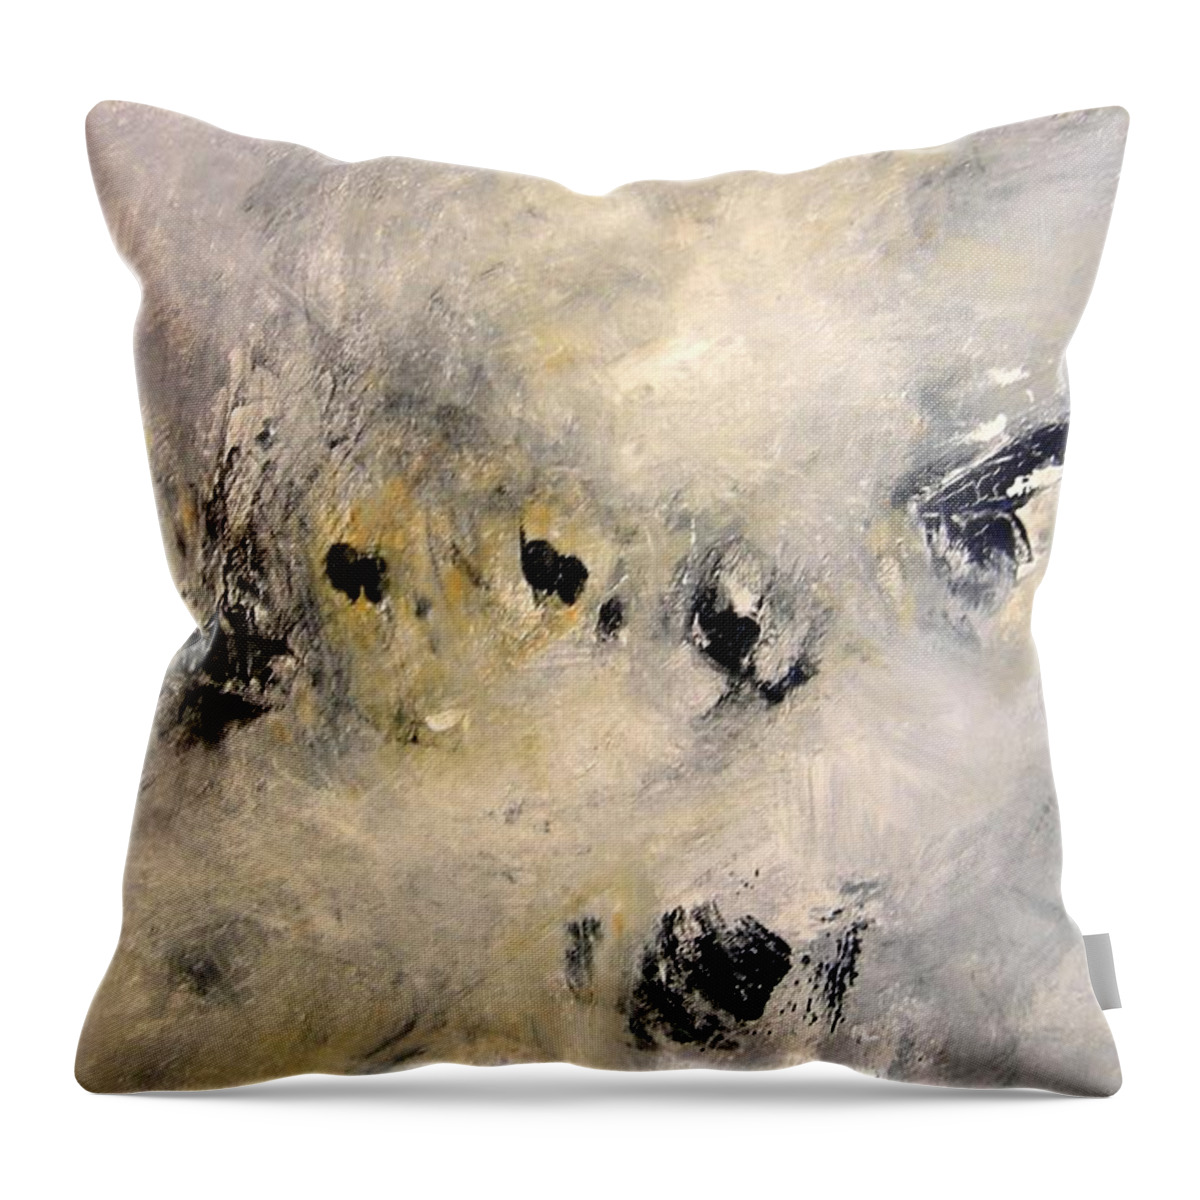  Throw Pillow featuring the painting Wabi Sabi Revisited by Rose Lynch